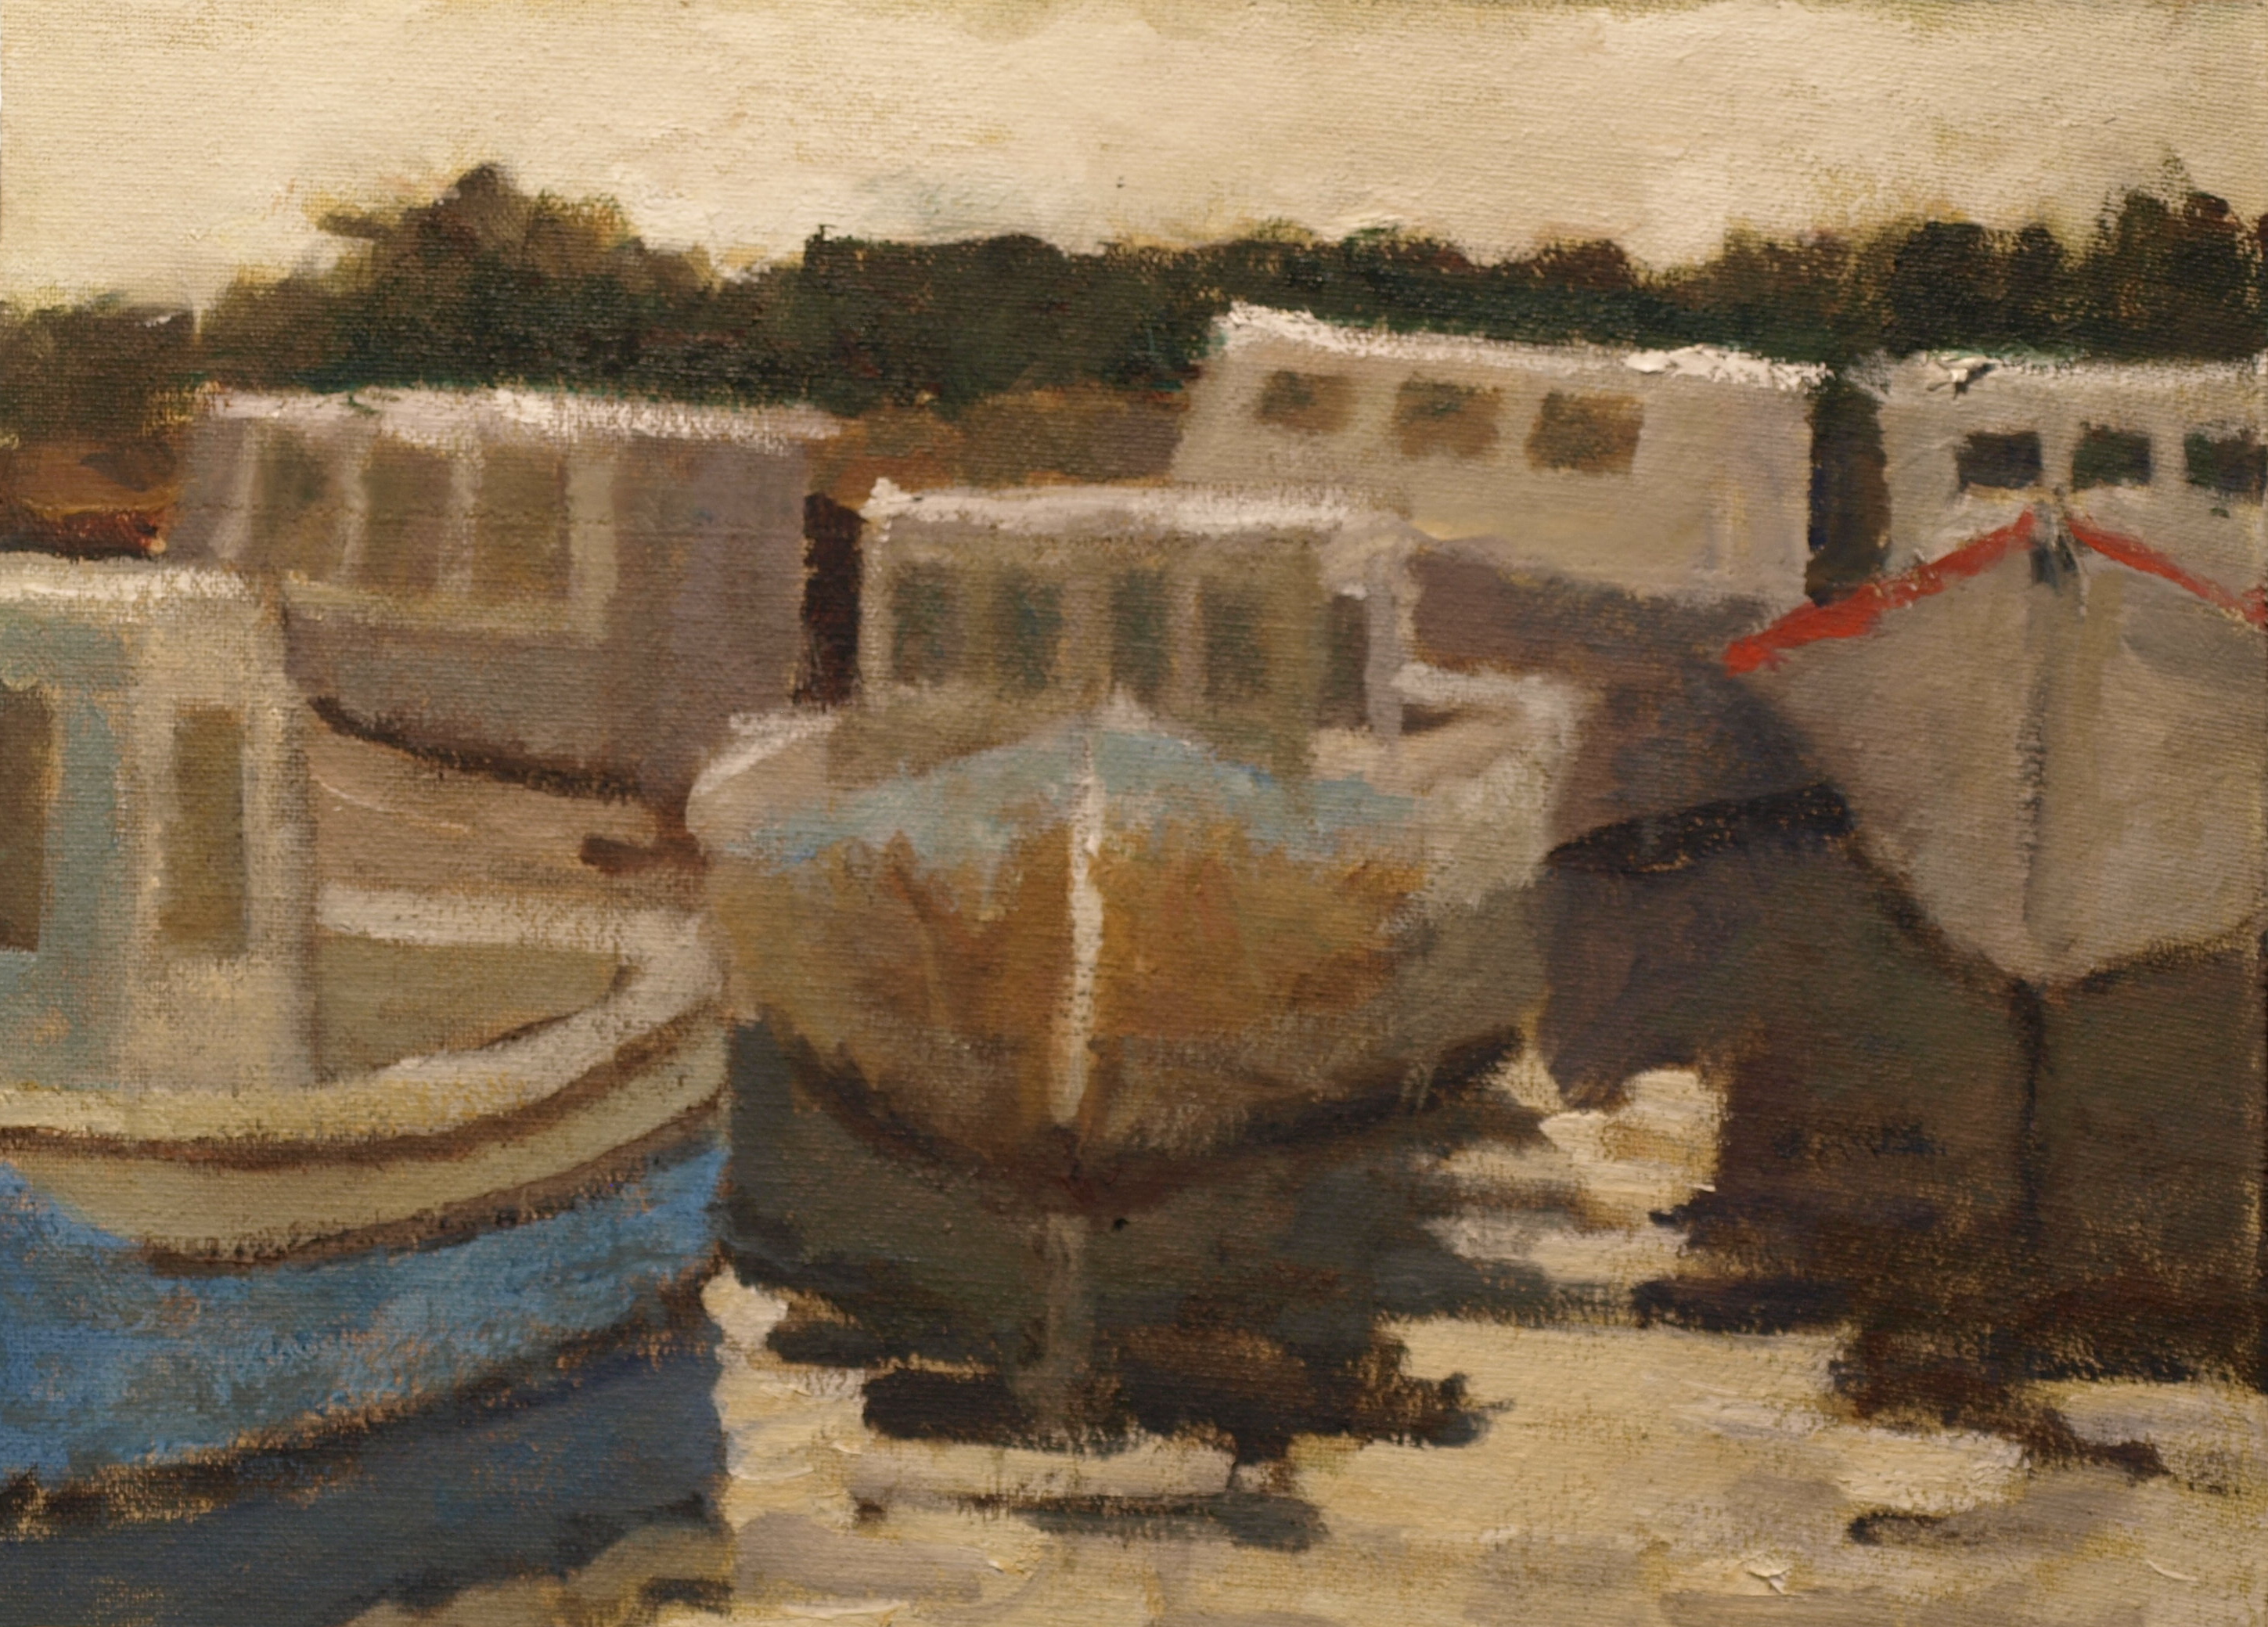 Busy Day Stonington Harbor, Oil on Canvas on Panel, 9 x 12 Inches, by Richard Stalter, $220